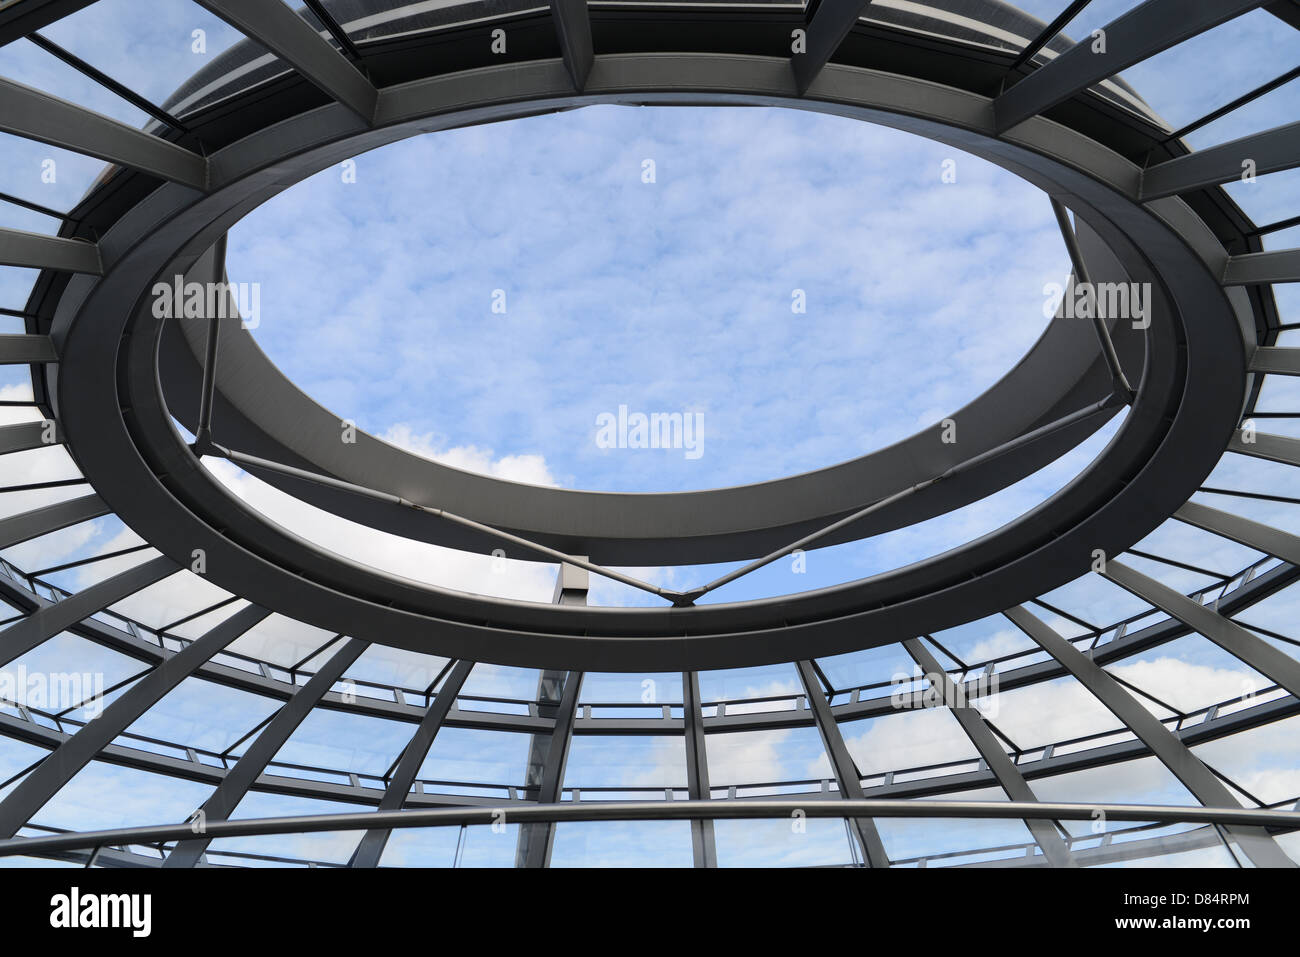 The dome (cupola) of the Reichstag Parliament Building in Berlin, Germany. Stock Photo